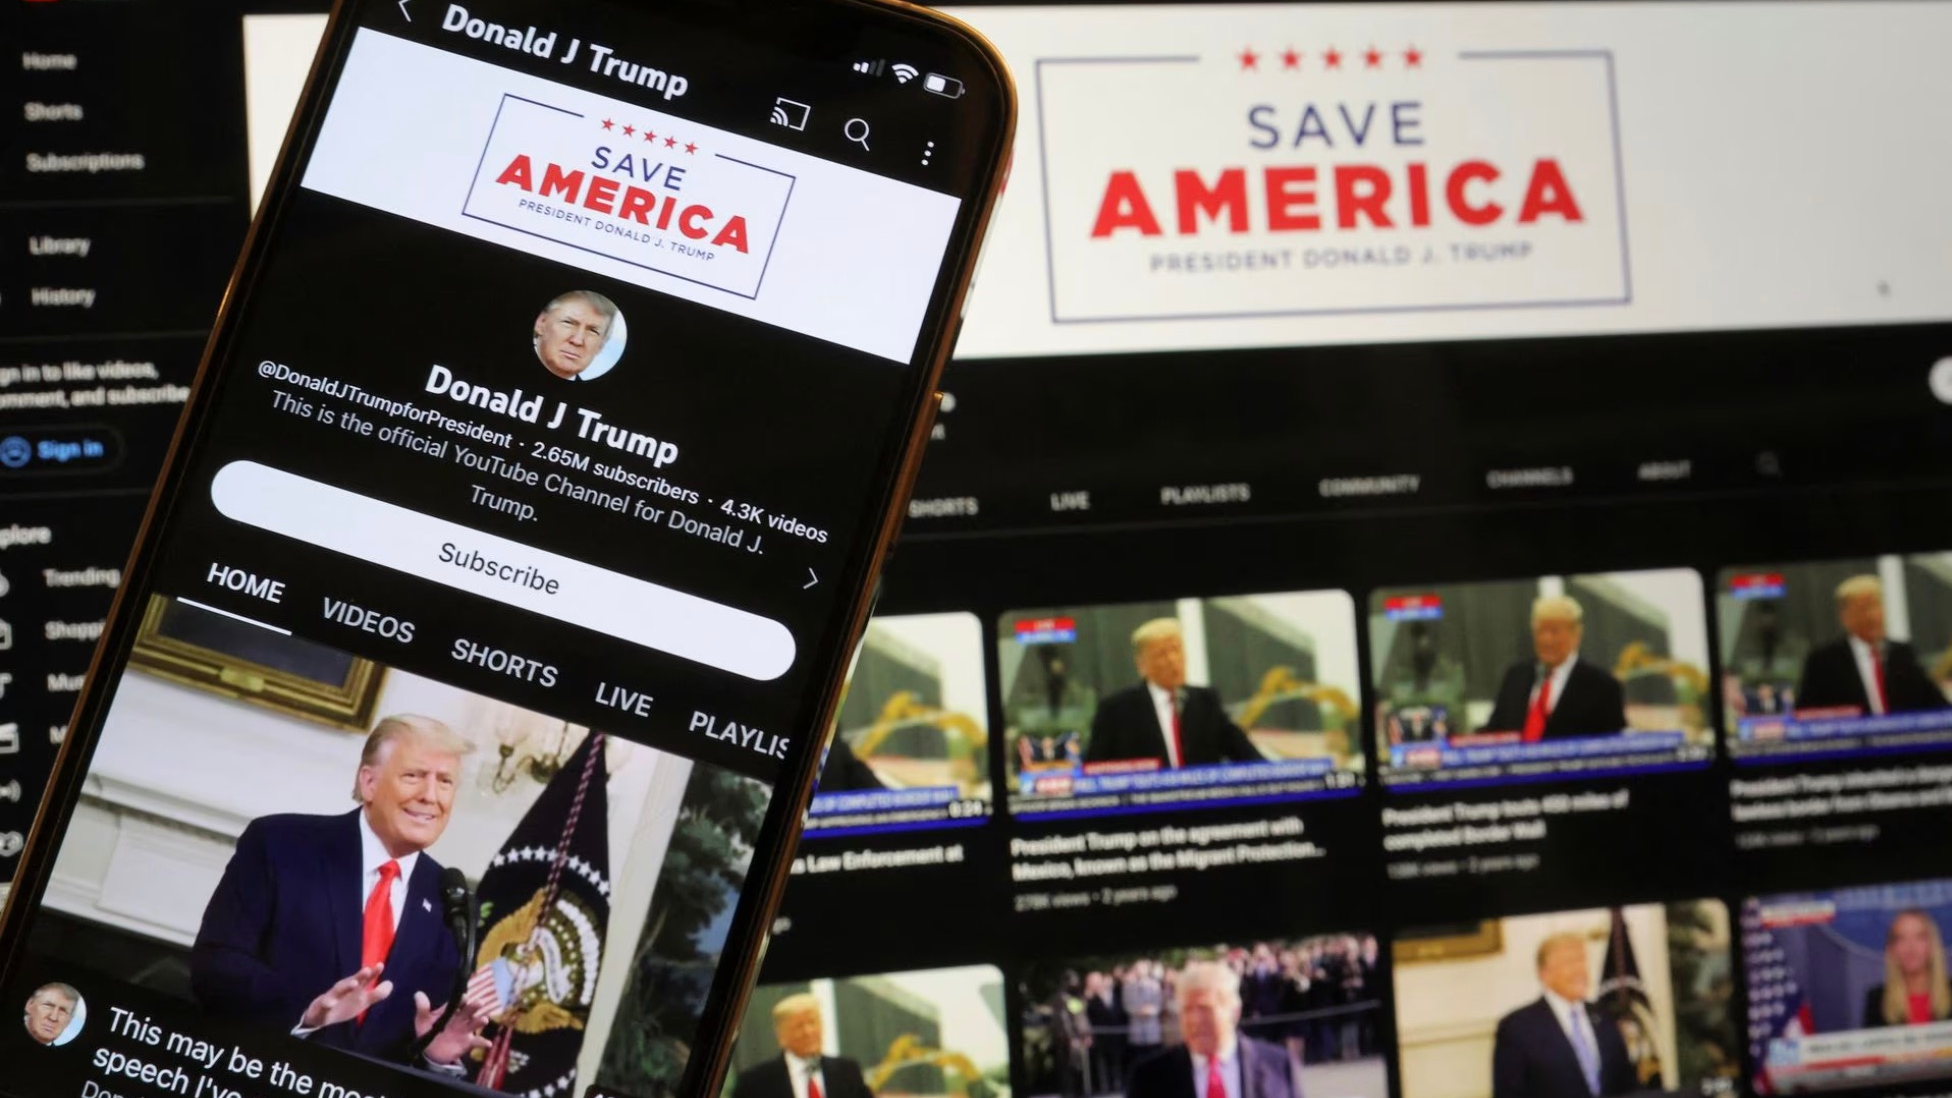 Former U.S. President Donald Trump's YouTube account is seen on a mobile phone and laptop computer after being restored by Google and its parent company Alphabet Inc, as Google lifted a more than two-year suspension imposed on Trump after the deadly January 6, 2021, Capitol Hill riot, in Washington, U.S., March 17, 2023. /Reuters